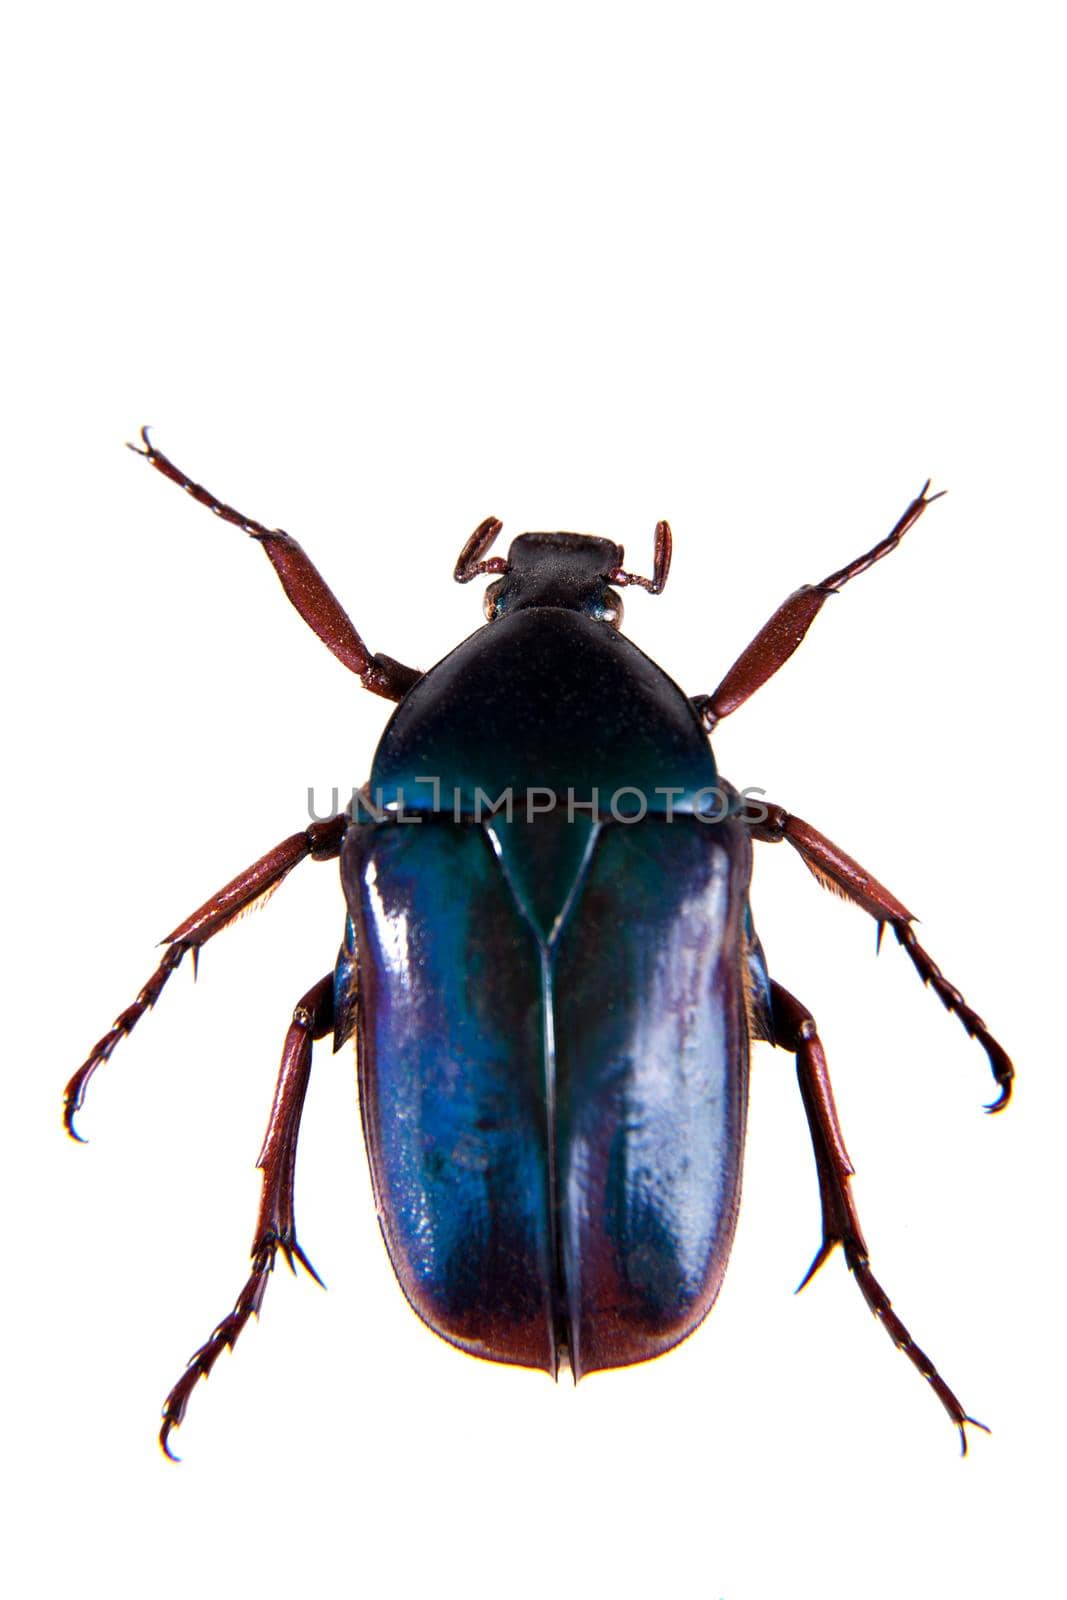 Blue beetle on the white background by RosaJay